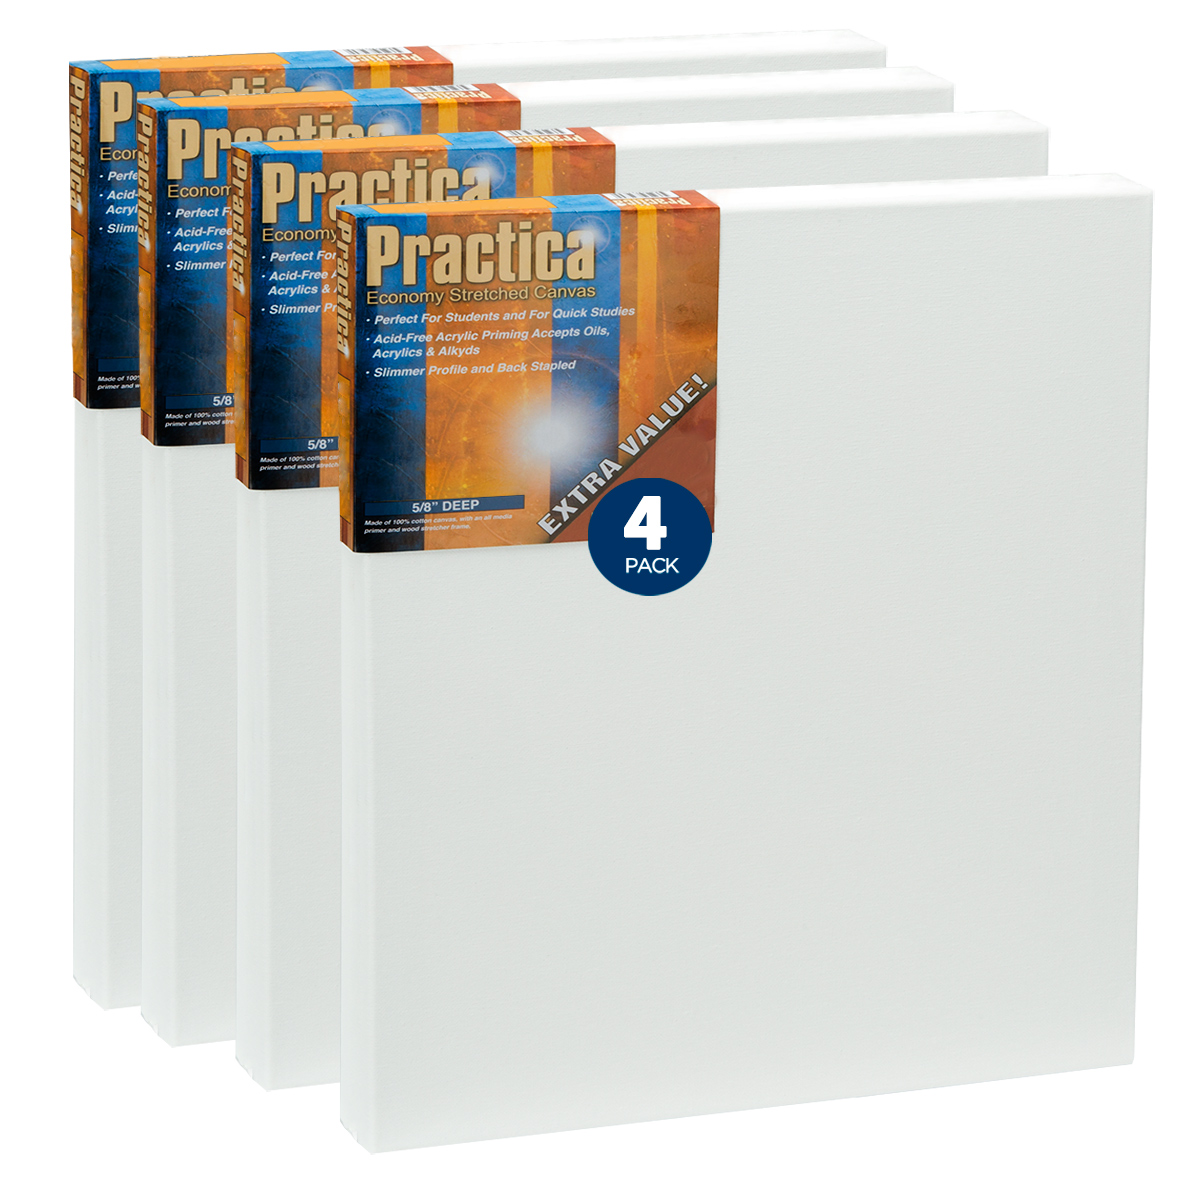 https://www.jerrysartarama.com/media/catalog/product/s/t/stretched-canvas-4-pack-practica-square-sw_2.jpg